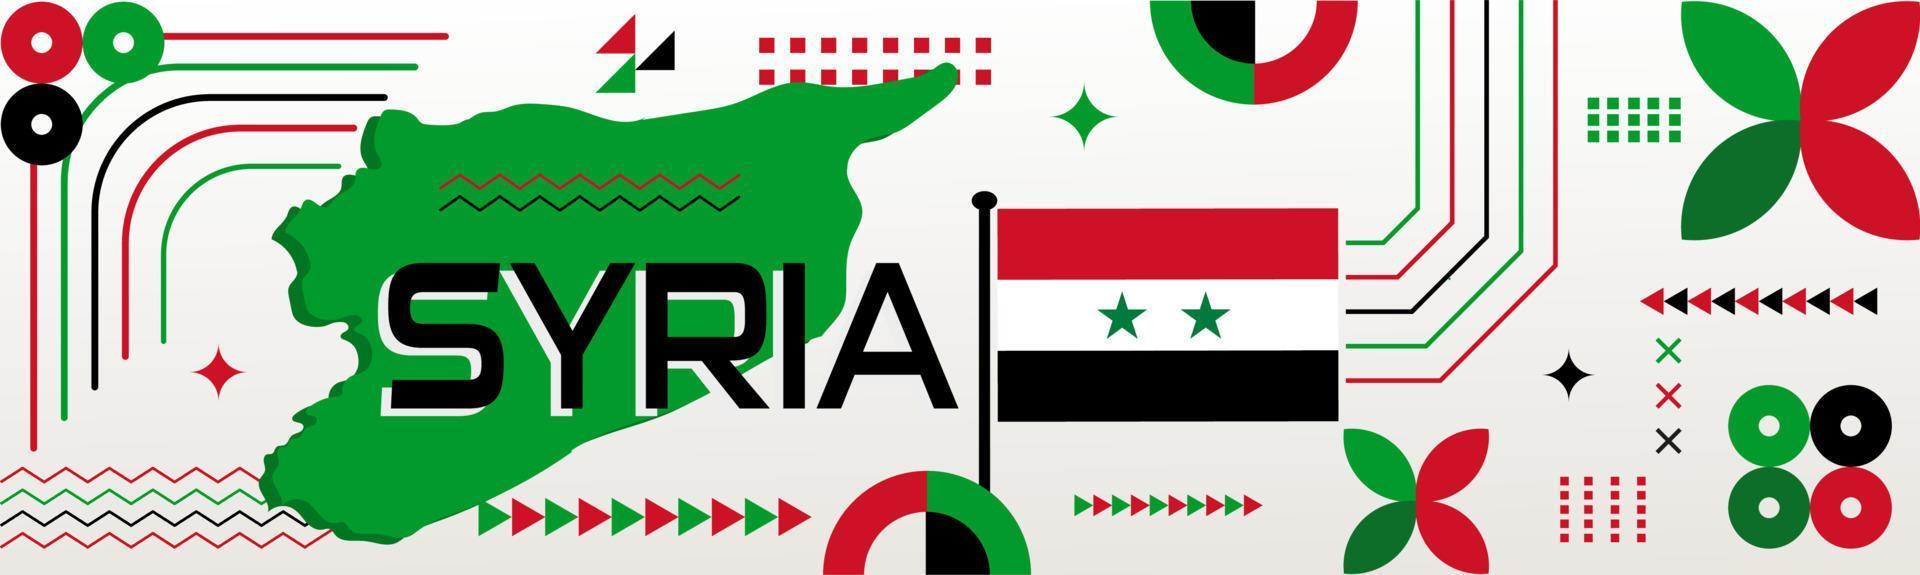 Syria national day banner with map, red, white, black,green flag color theme background and abstract geometric design. Syrian independence day theme. White background Vector illustration